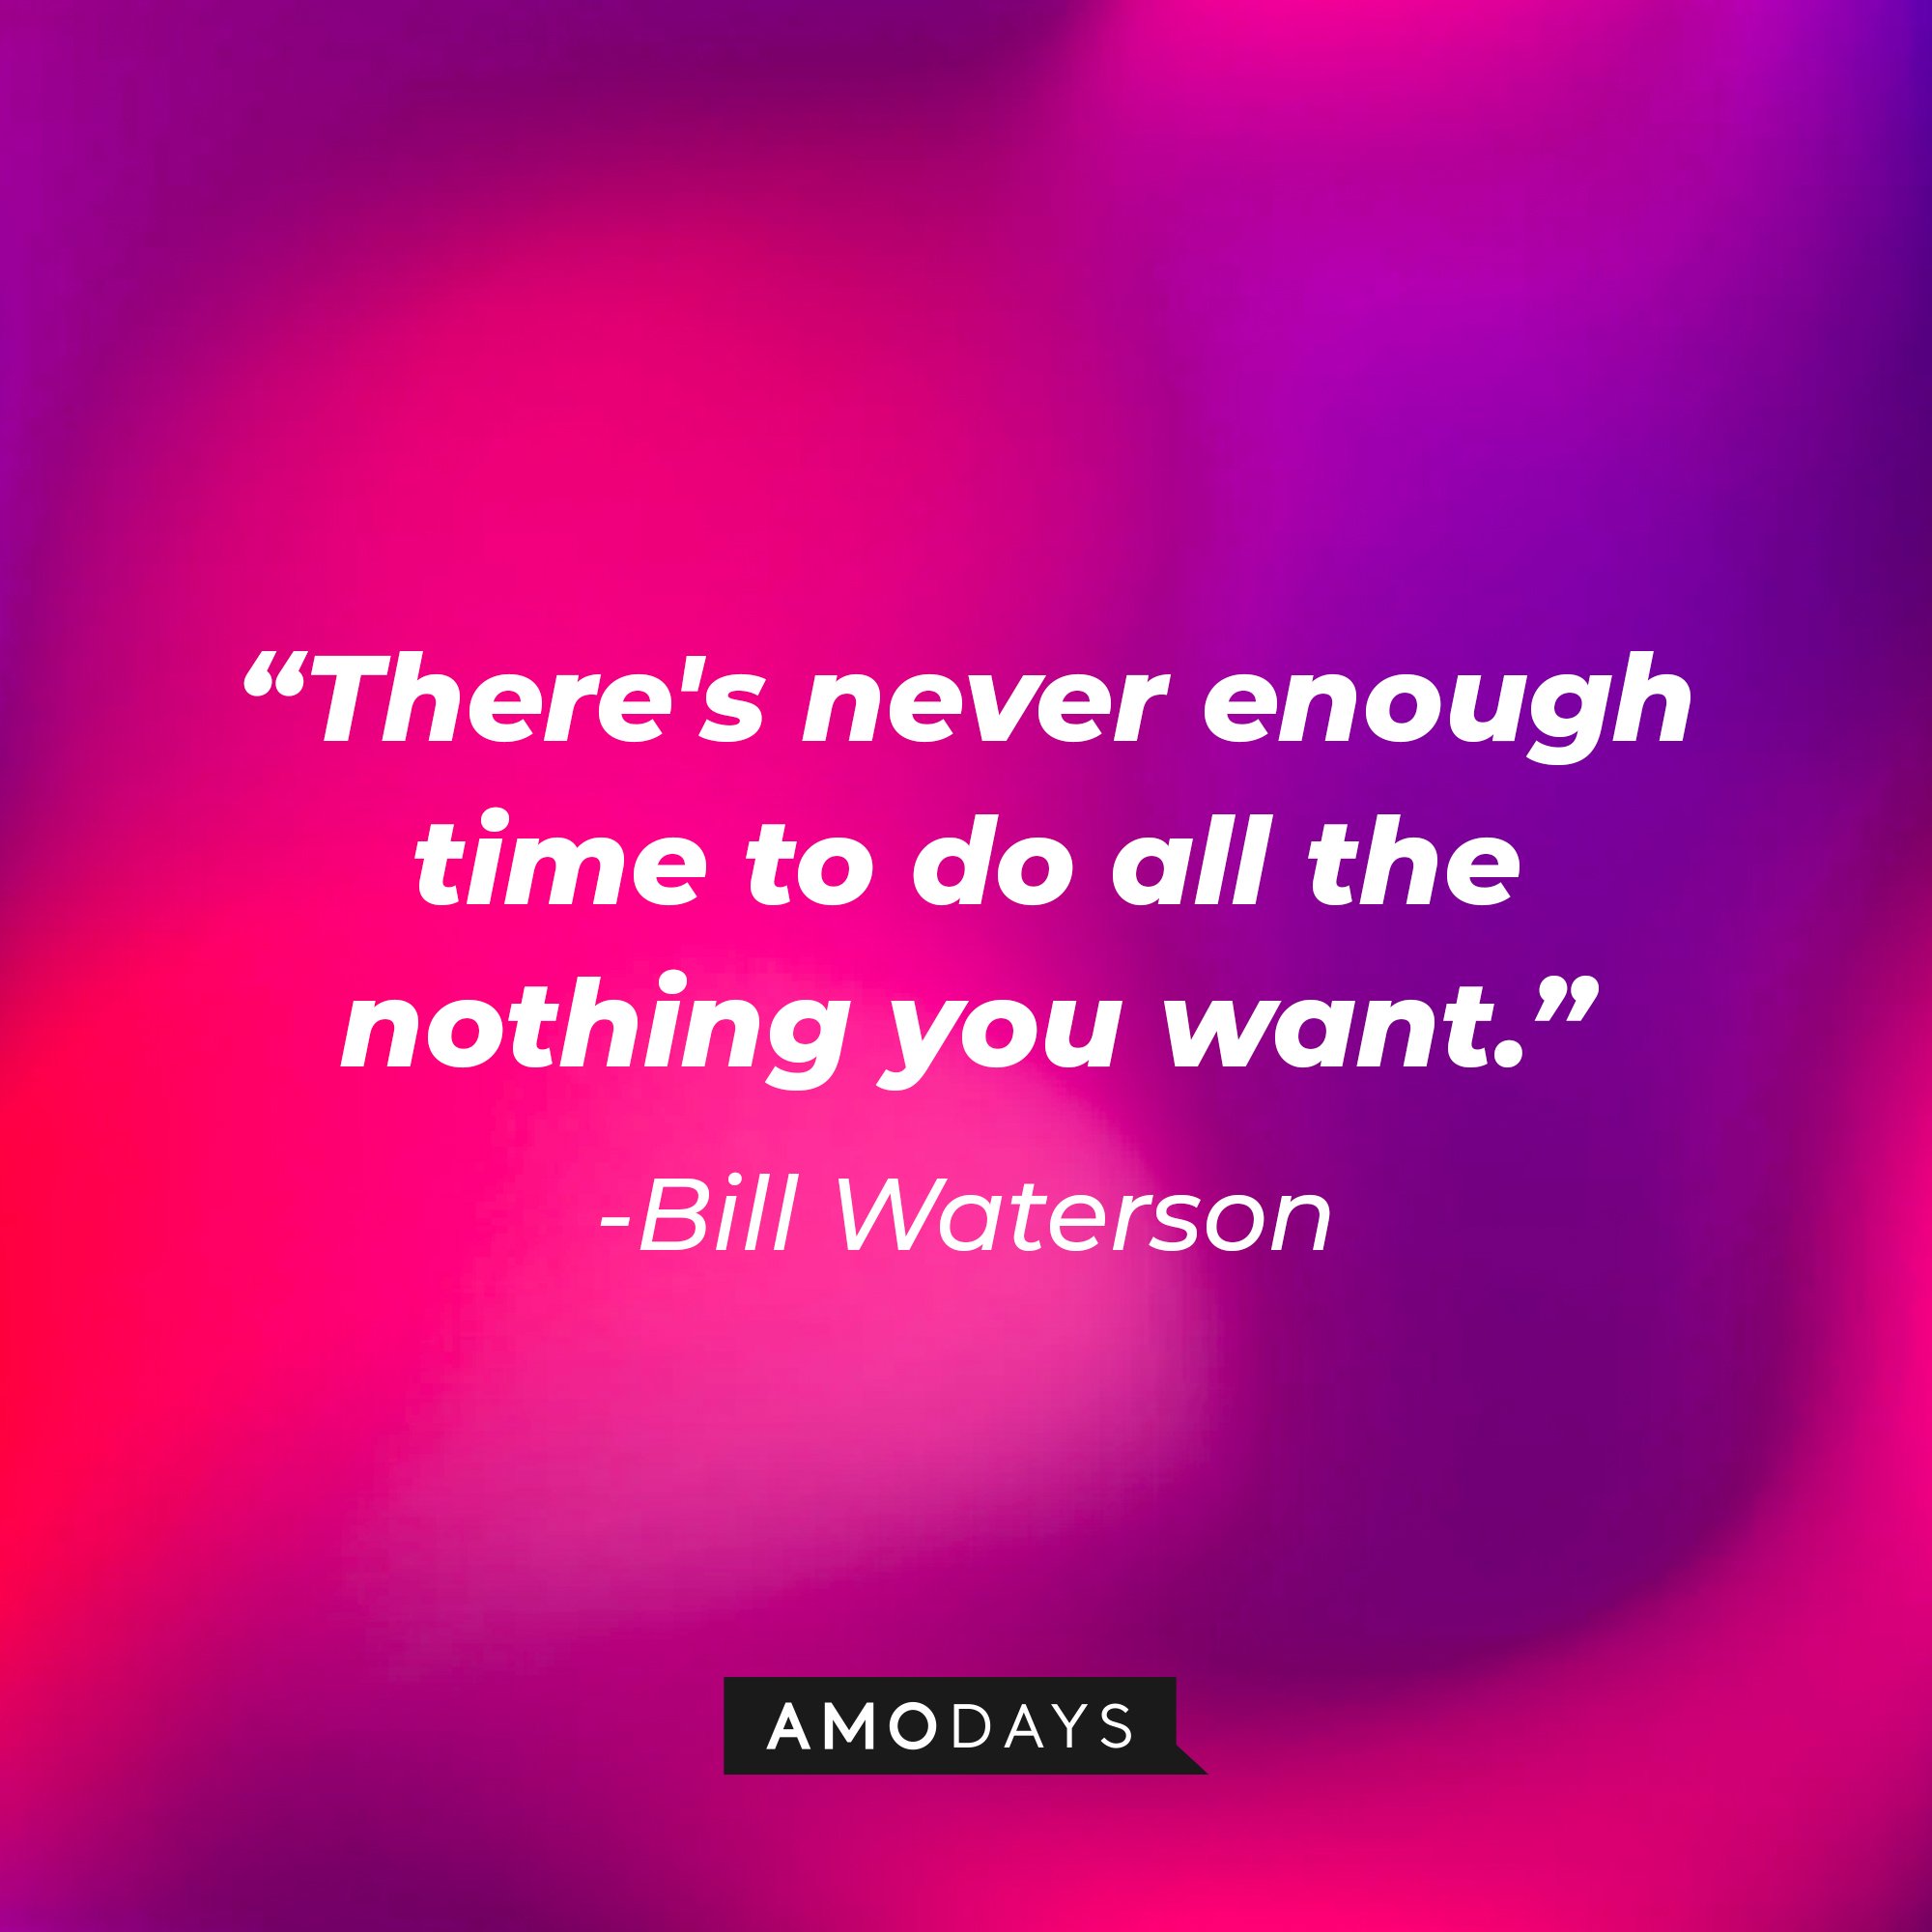 Bill Waterson’s quote: “There’s never enough time to do all the nothing you want.” | Image: AmoDays